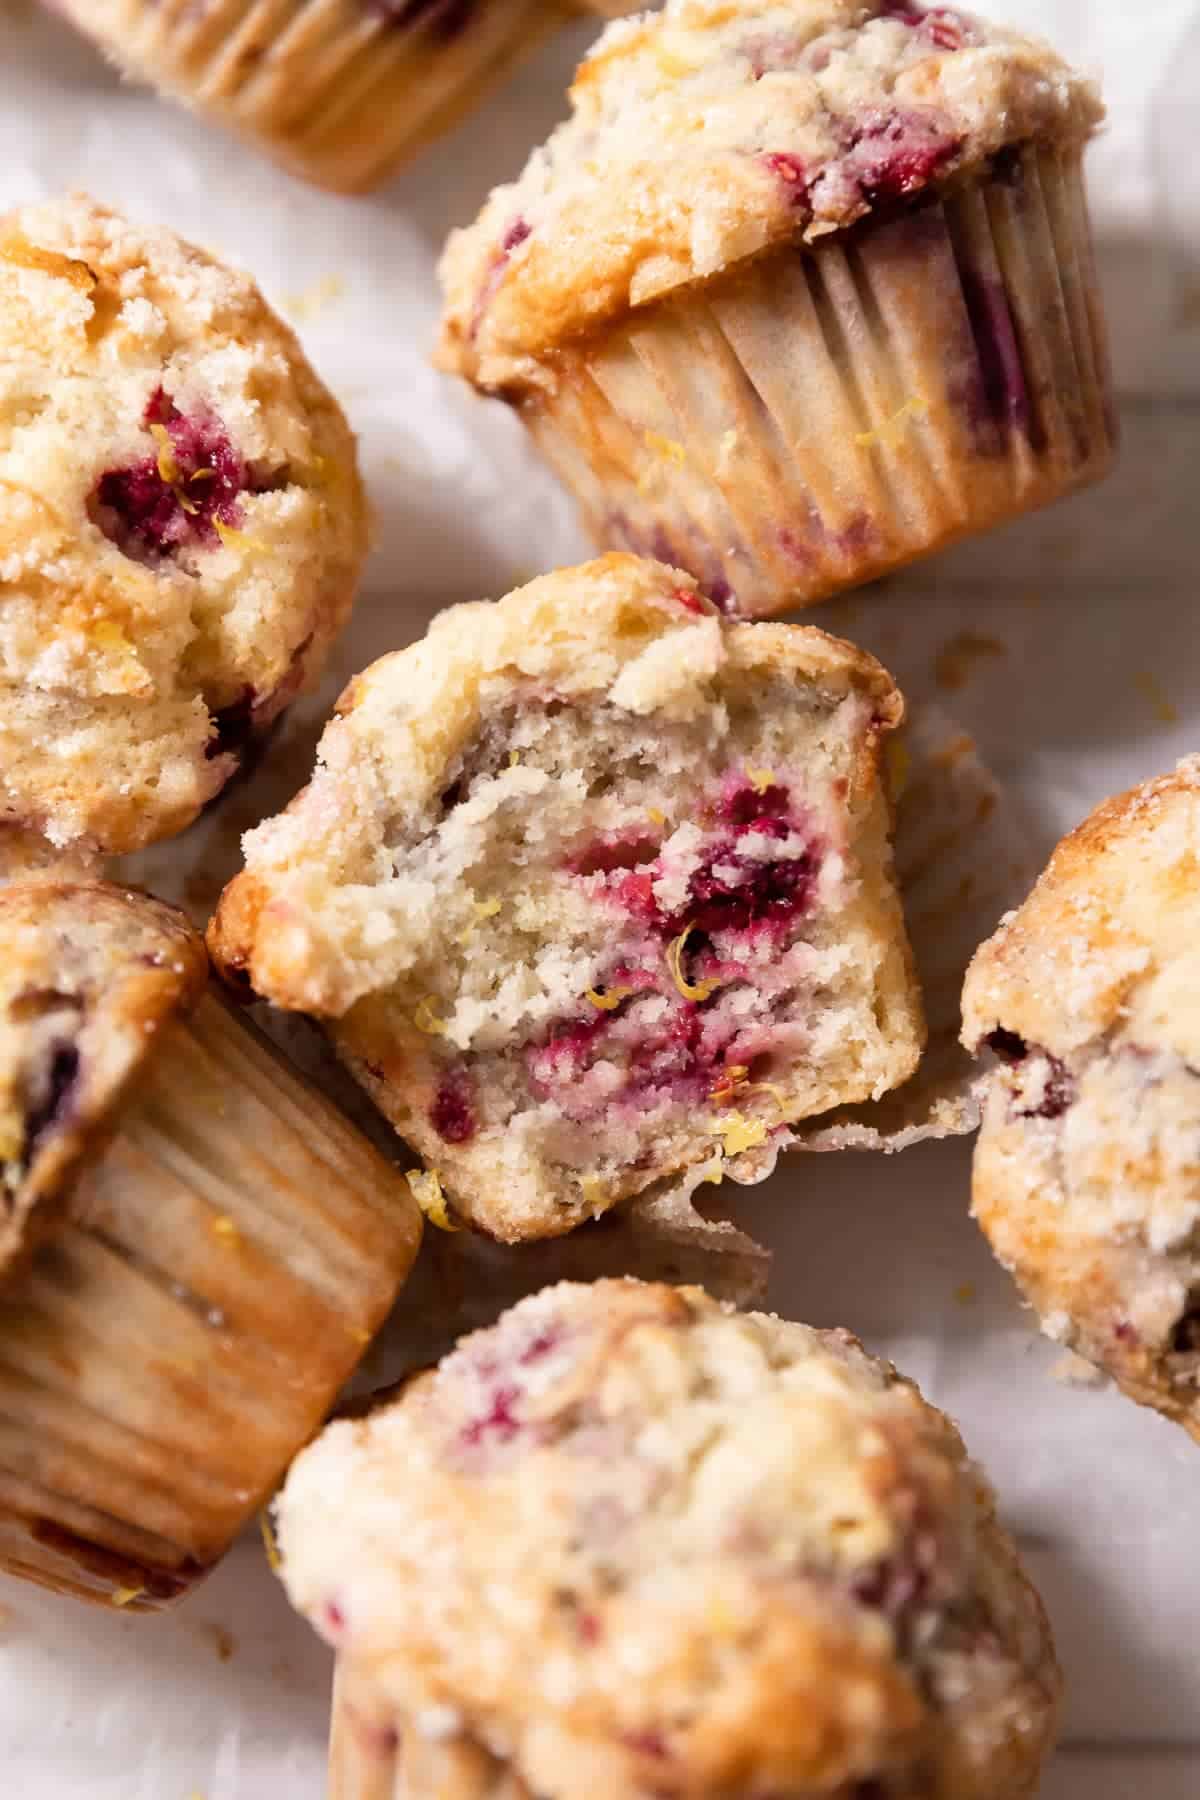 A raspberry muffin on its side with a bite taken out of it covered in fresh lemon zest.